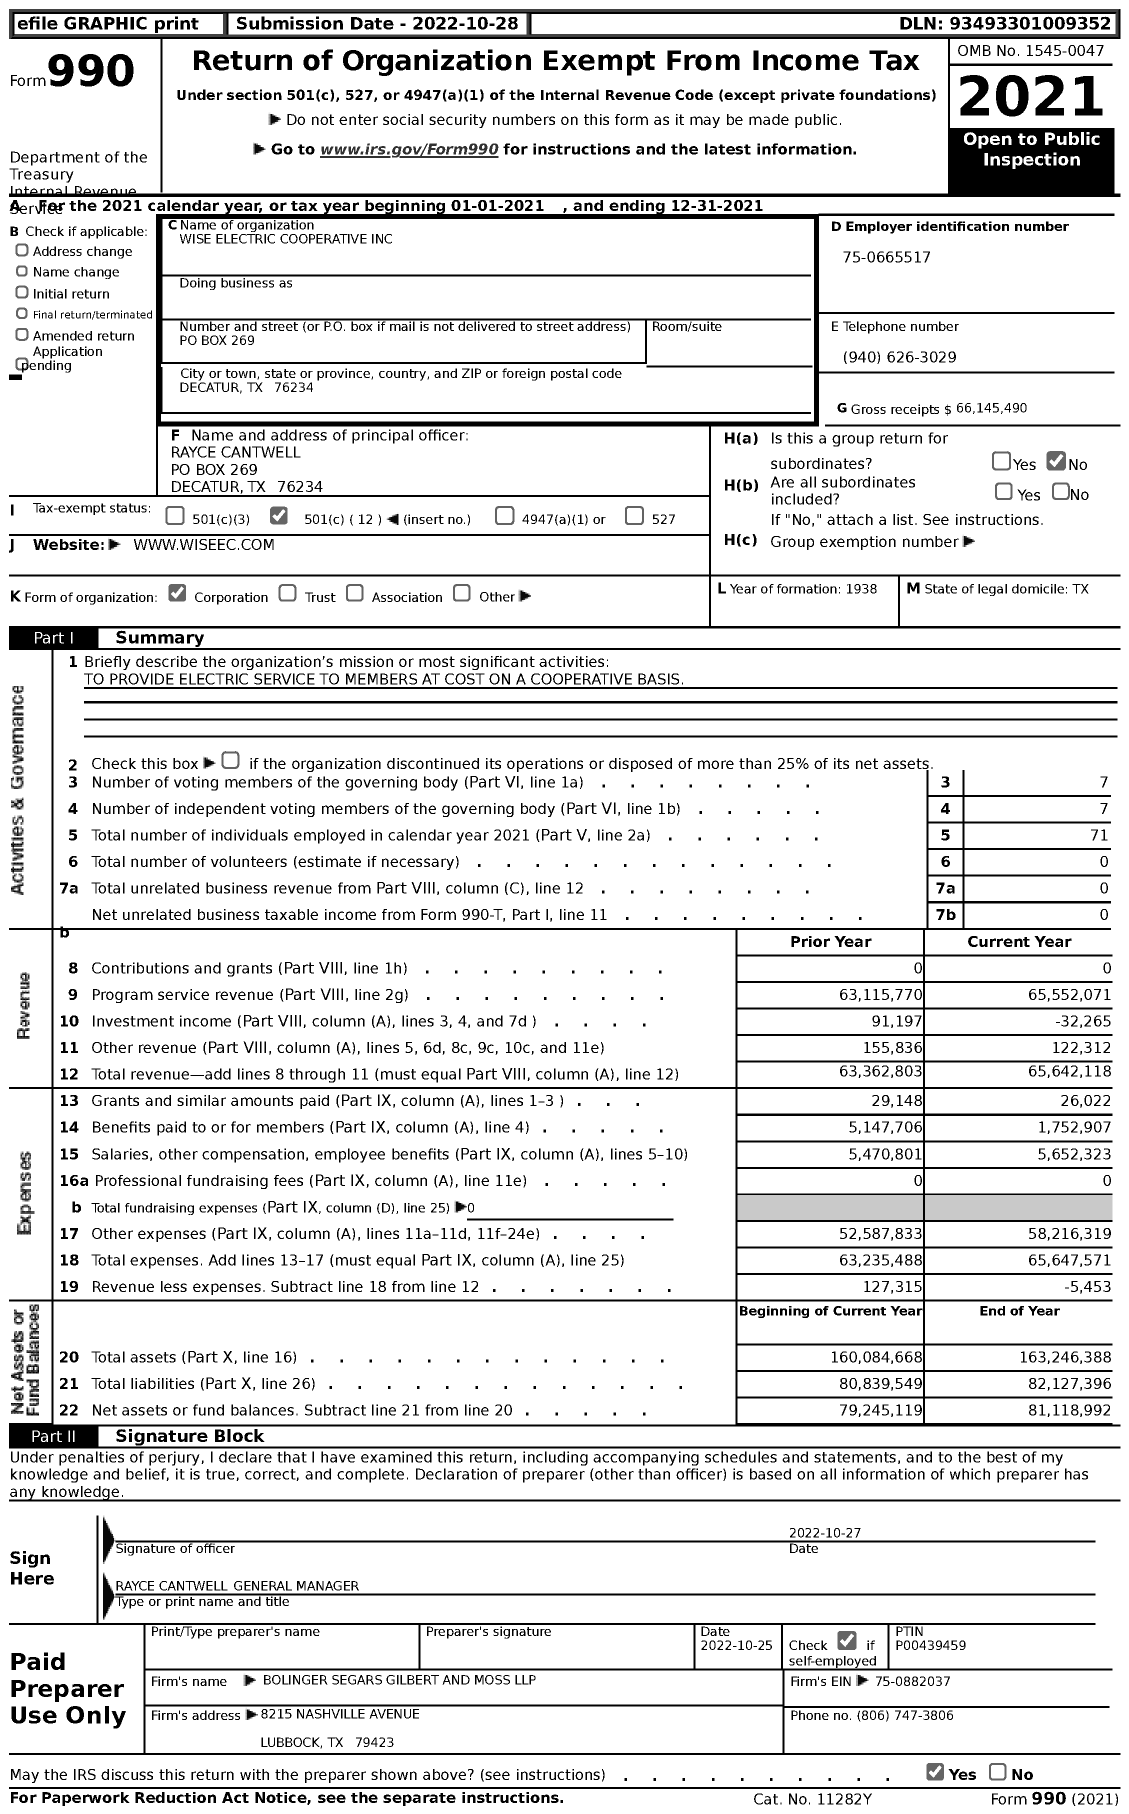 Image of first page of 2021 Form 990 for Wise Electric Cooperative